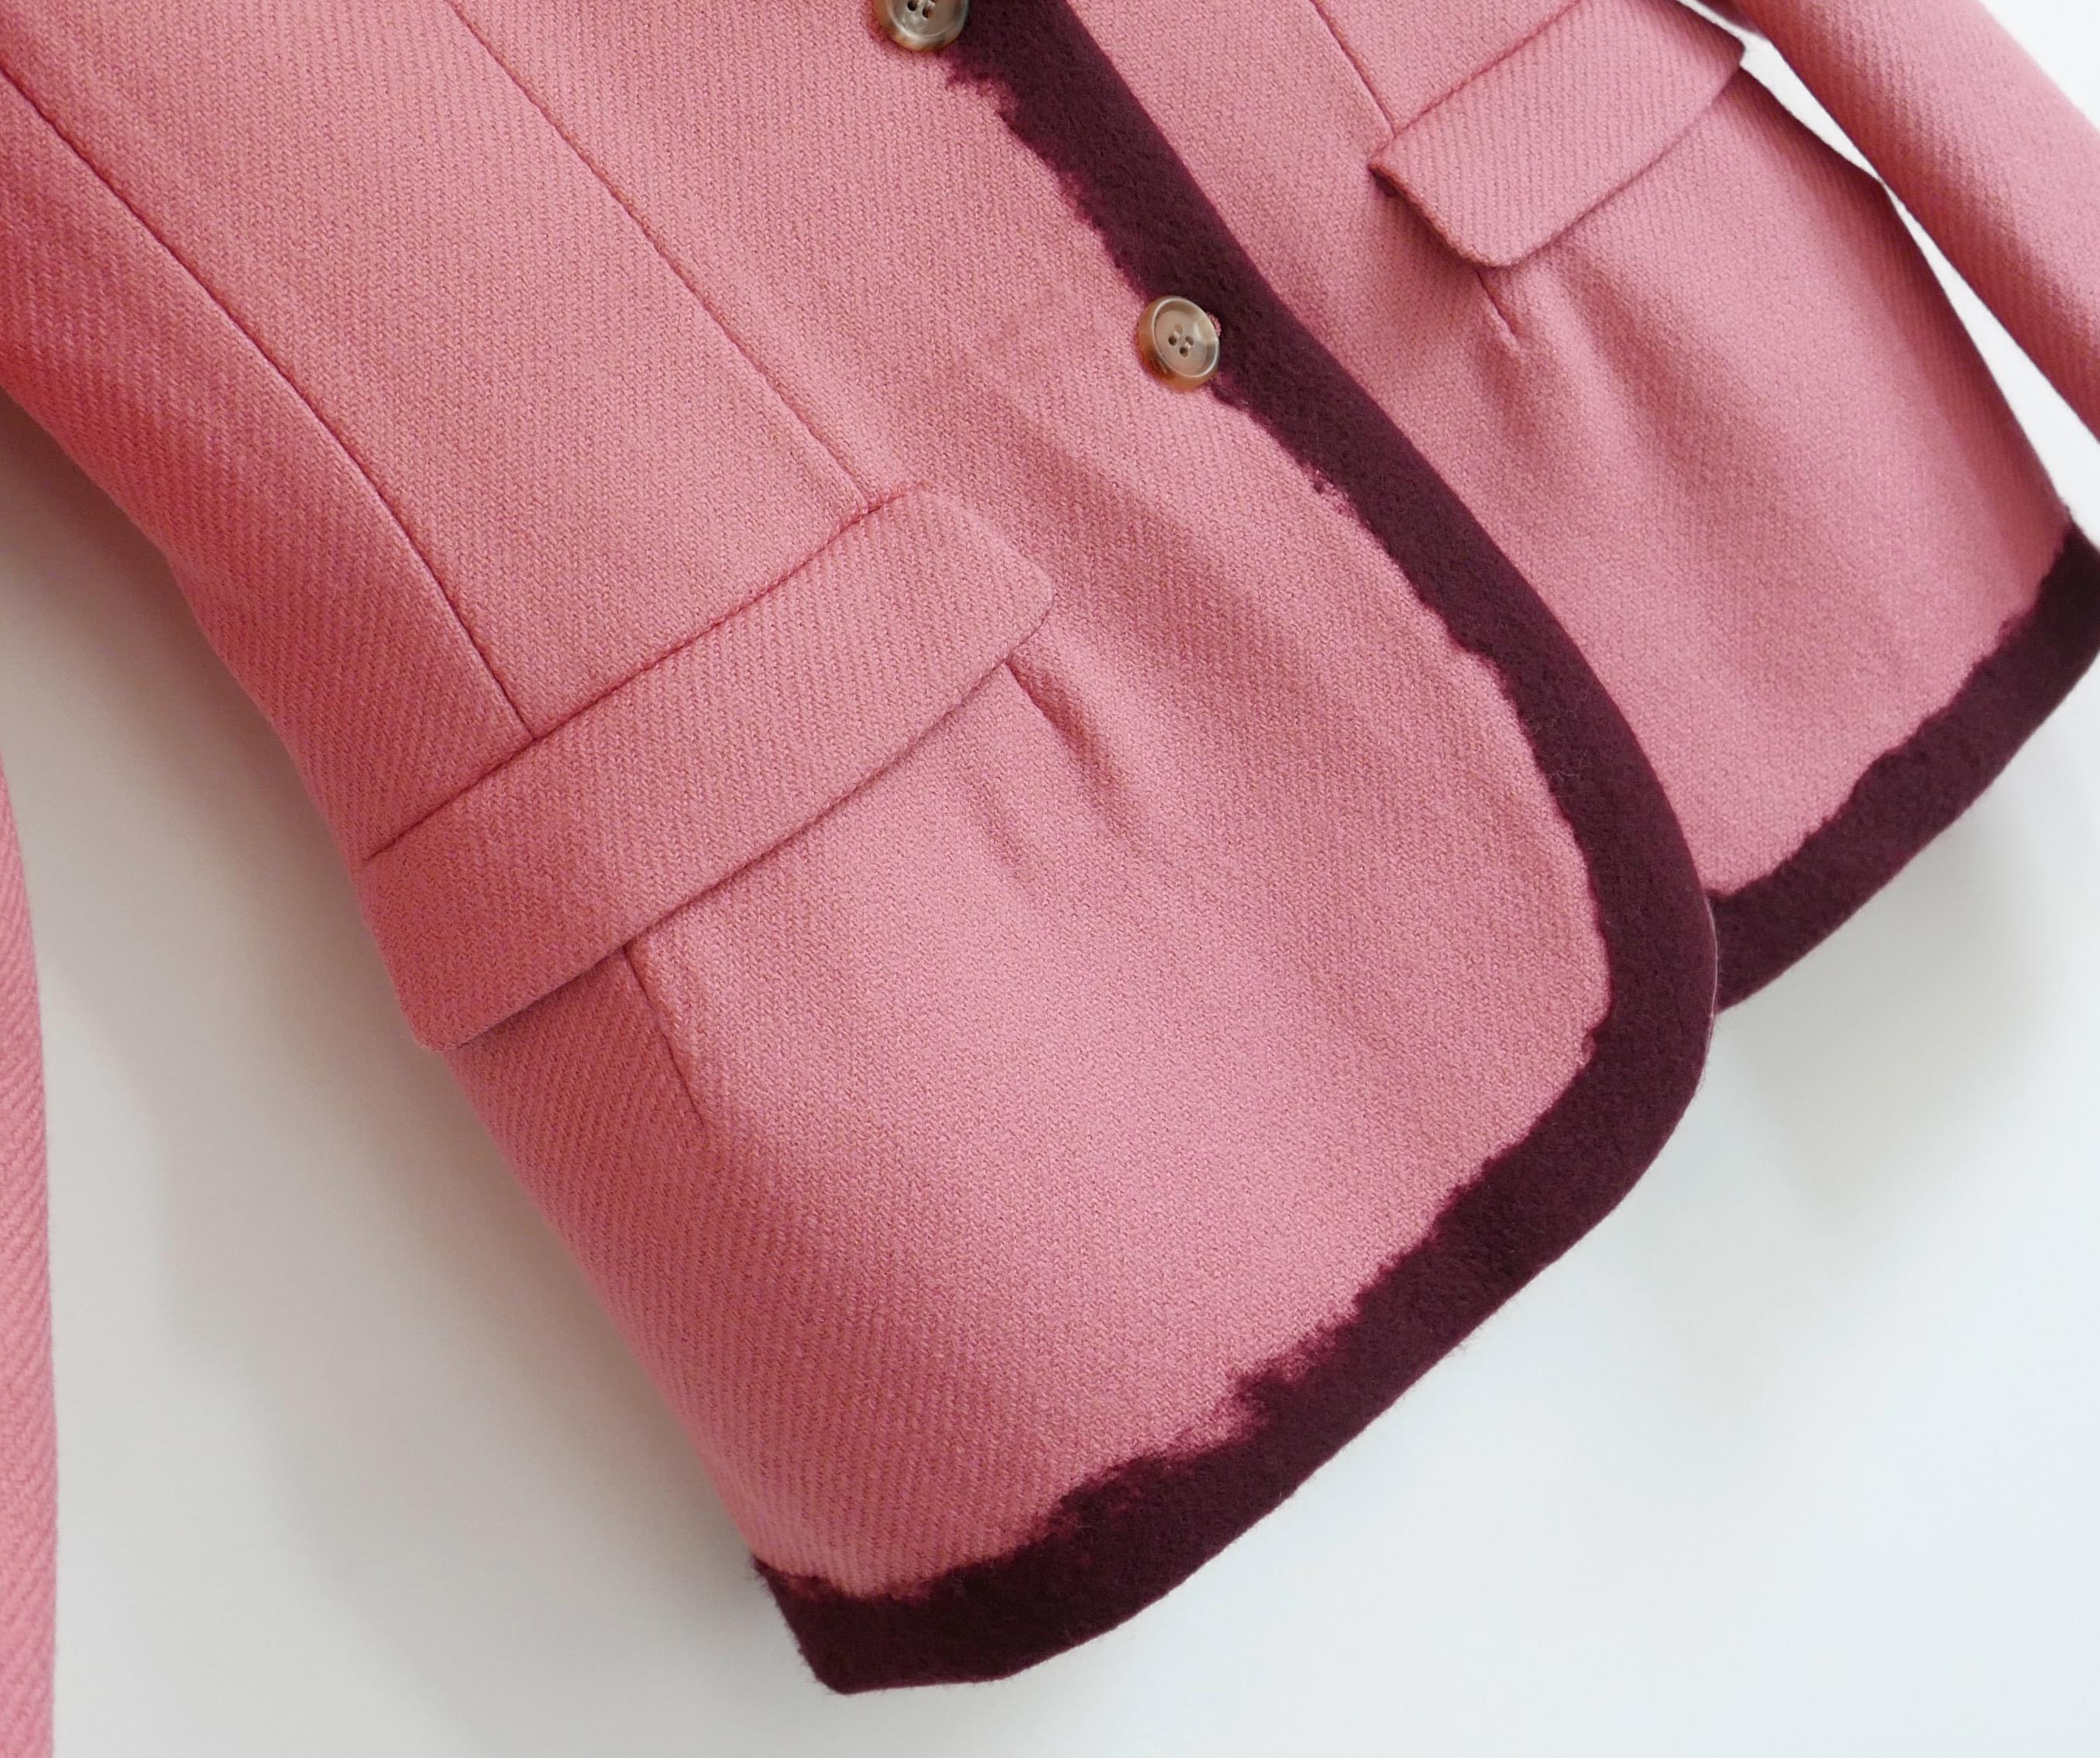 Prada Fall 2007 Pink Wool Ombre Felt Jacket In Excellent Condition For Sale In London, GB